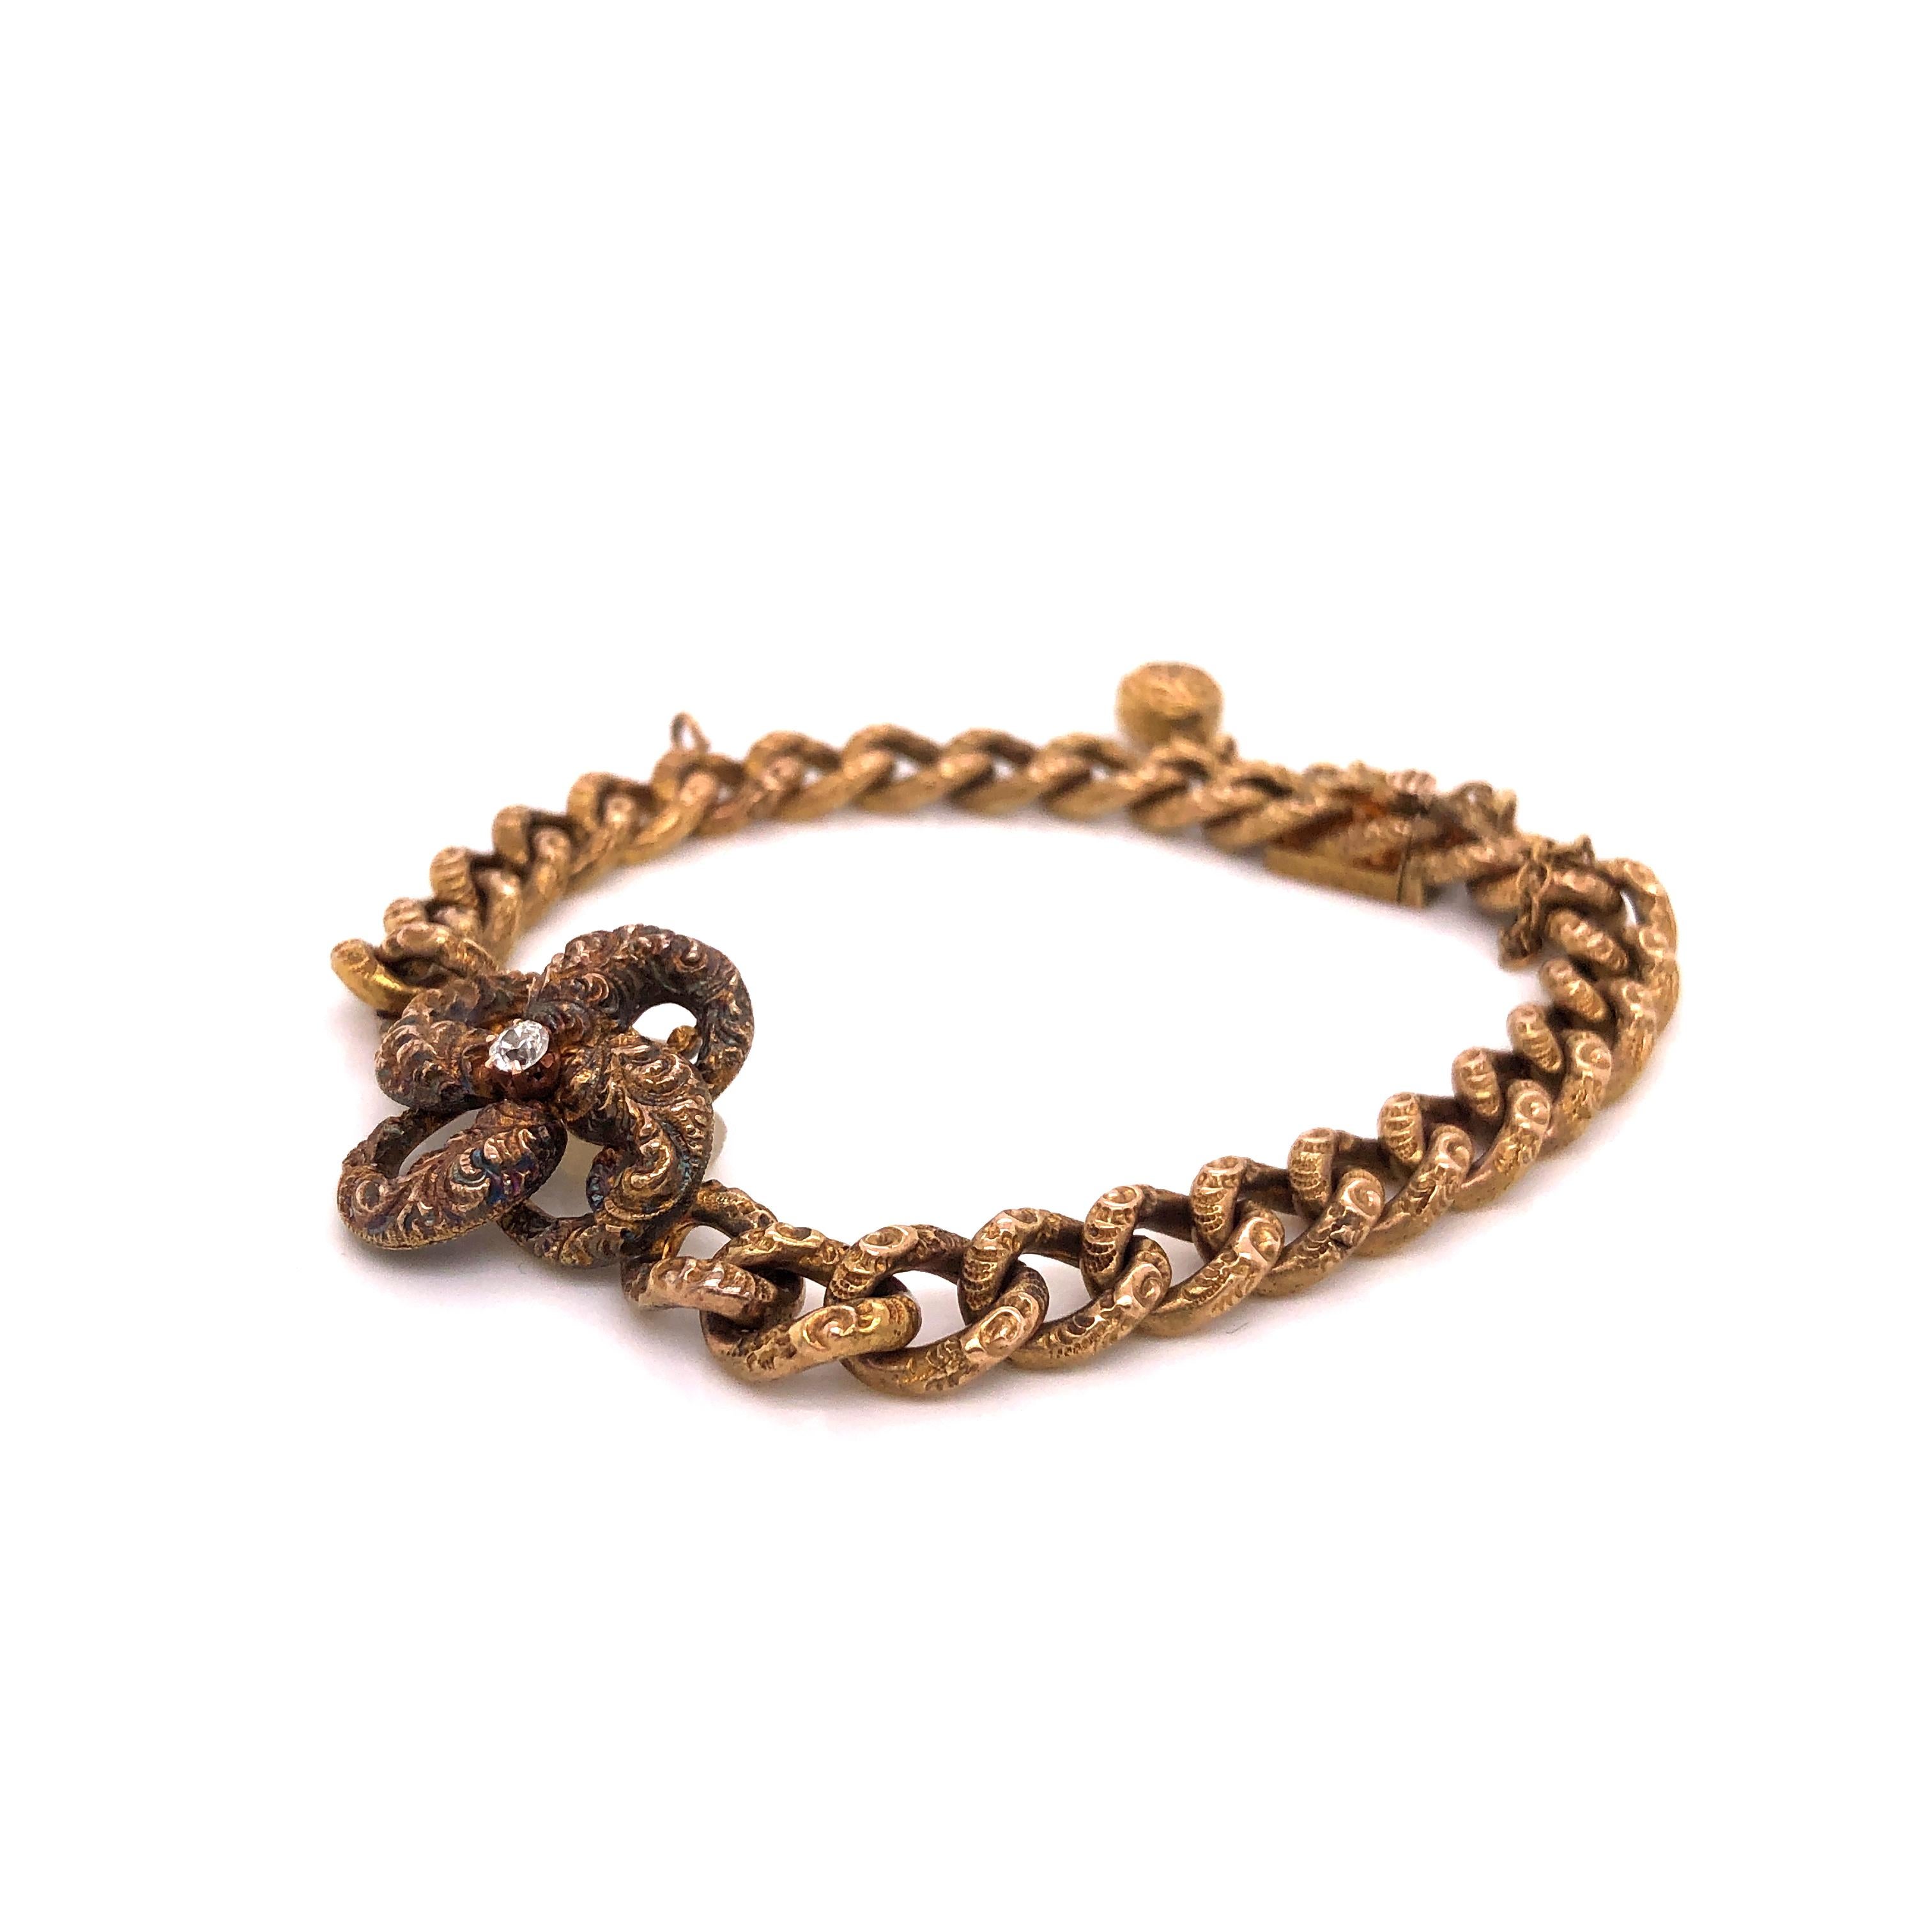 Amazing design on this Victorian bracelet. The bracelet is crafted from 14k yellow gold and details are endless. The curved link design flows perfectly in this light weight design. The links on the bracelet are etched showing gorgoues pattern